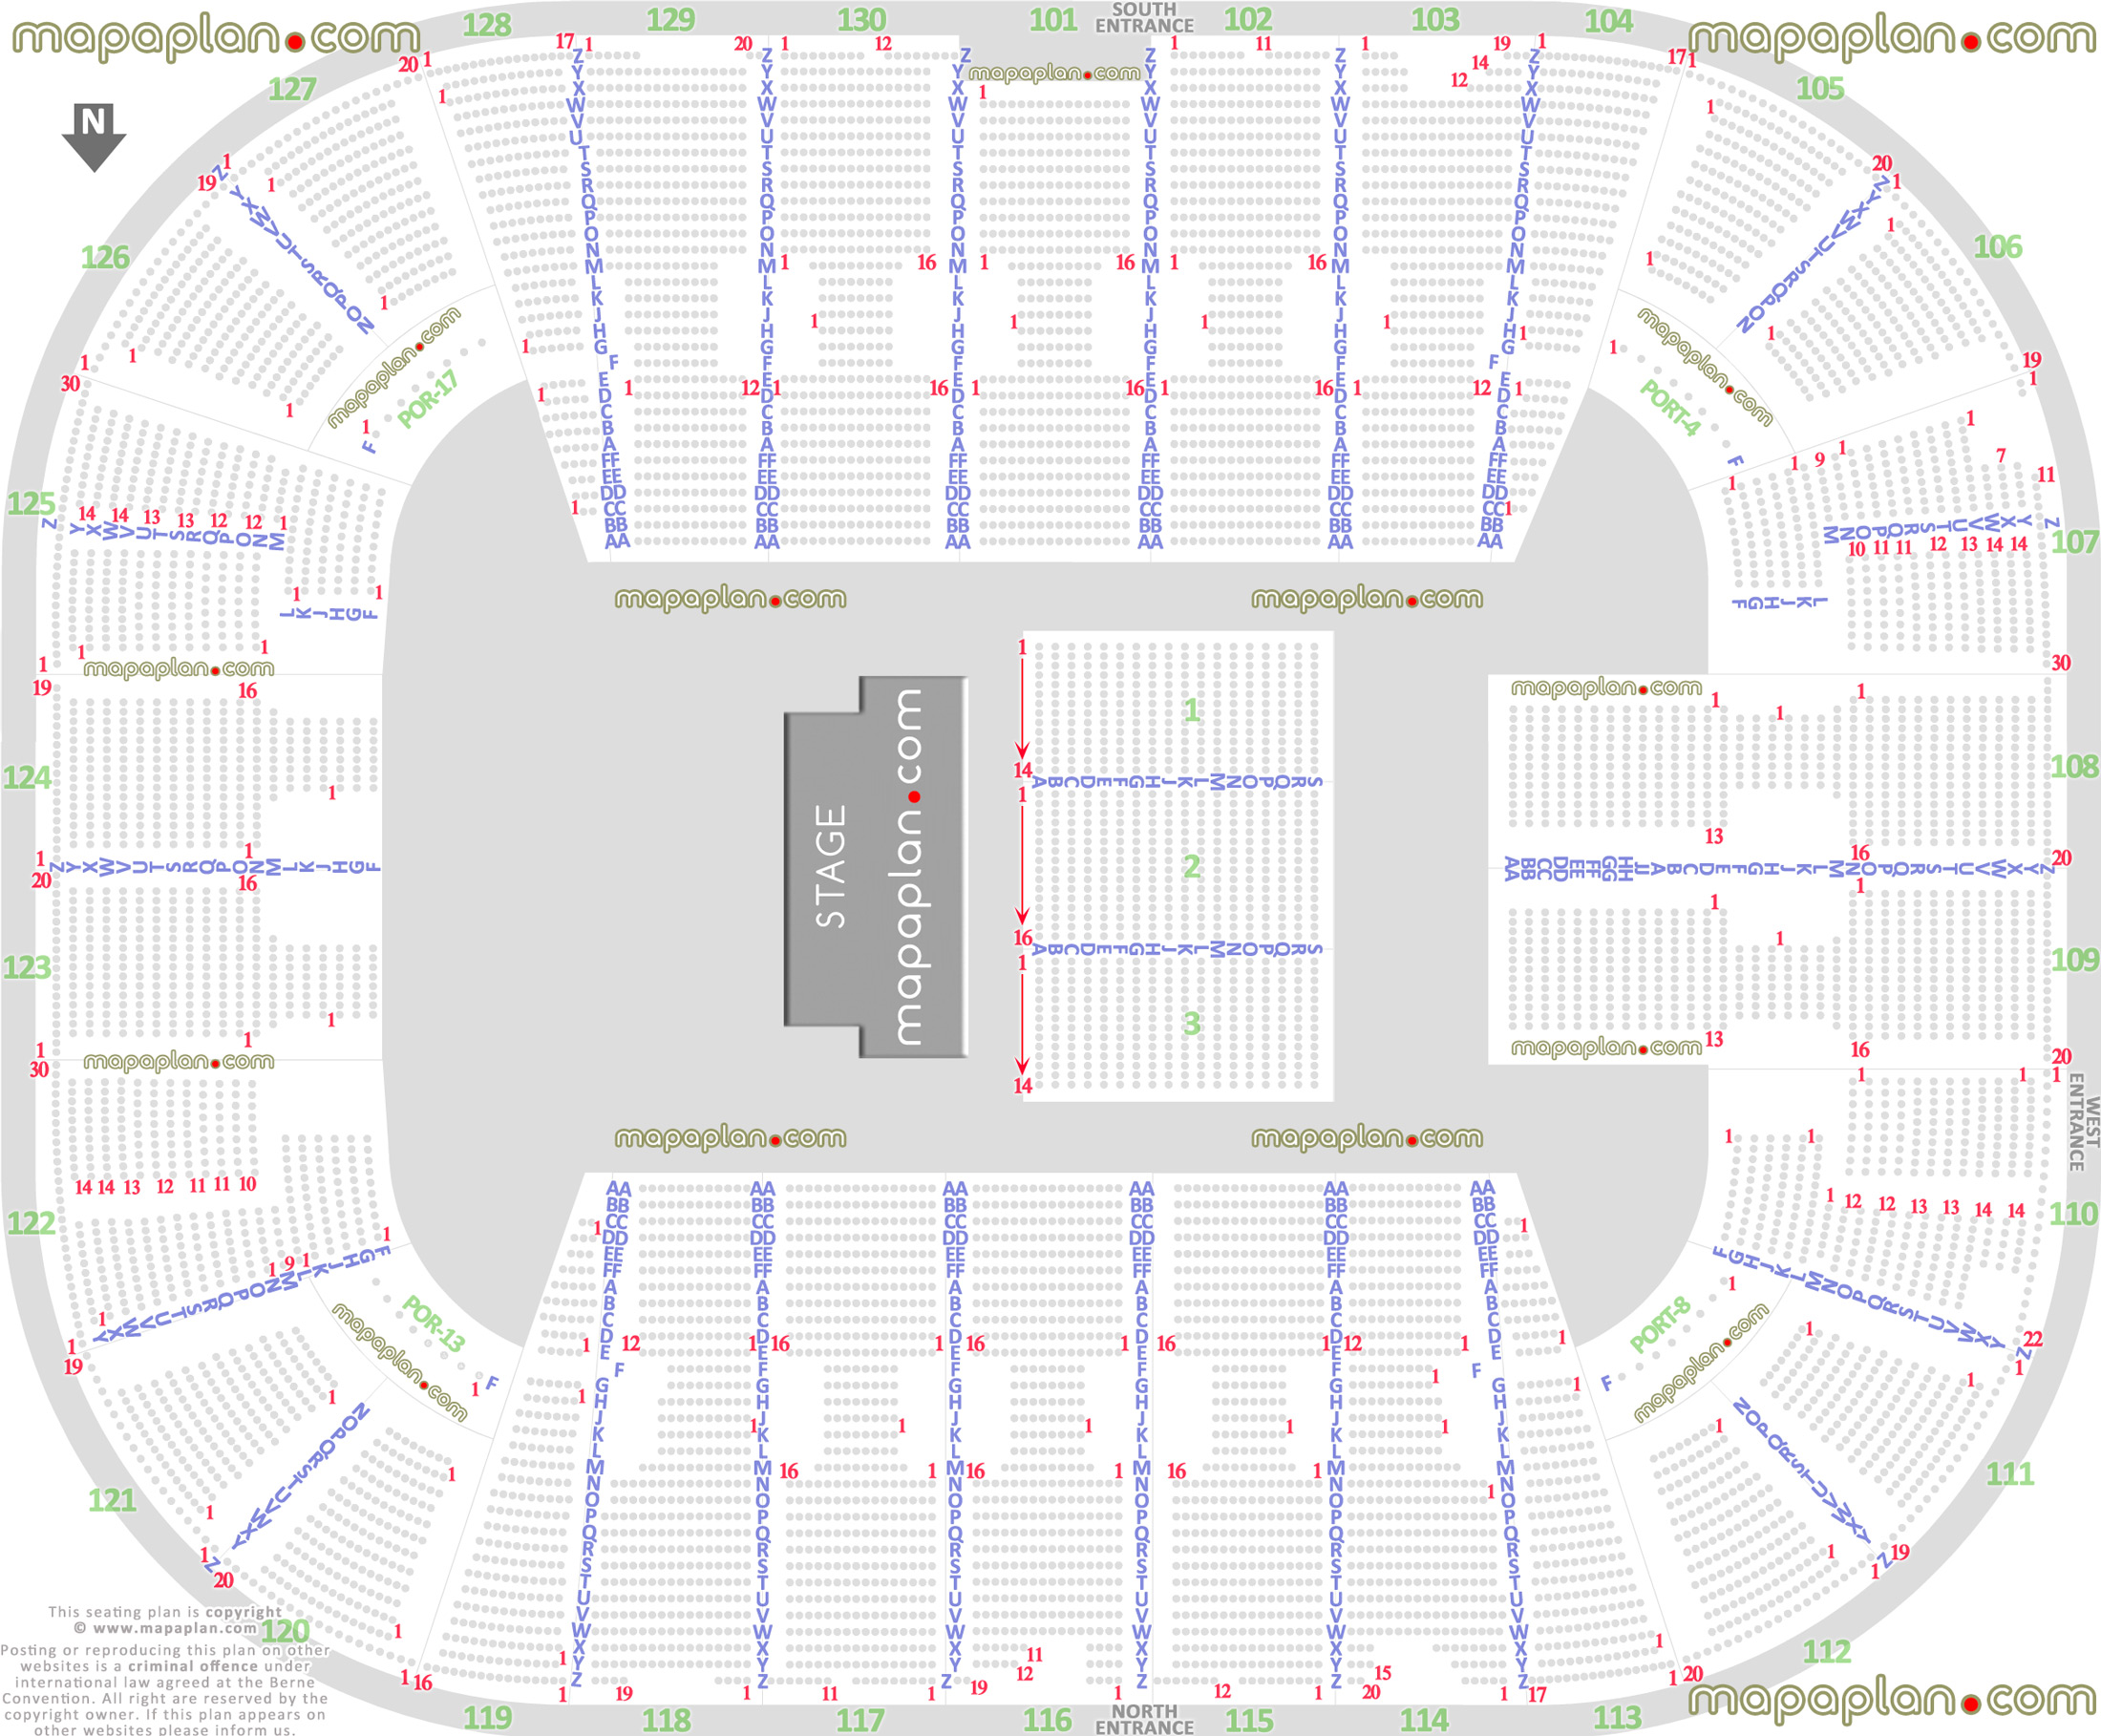 half house theater concert stage interactive tickets layout new printable seat numbers chart rows aa bb cc dd ee ff gg hh jj a b c d e f g h j k l m n o p q r s t u v w x y z Fairfax EagleBank Arena seating chart